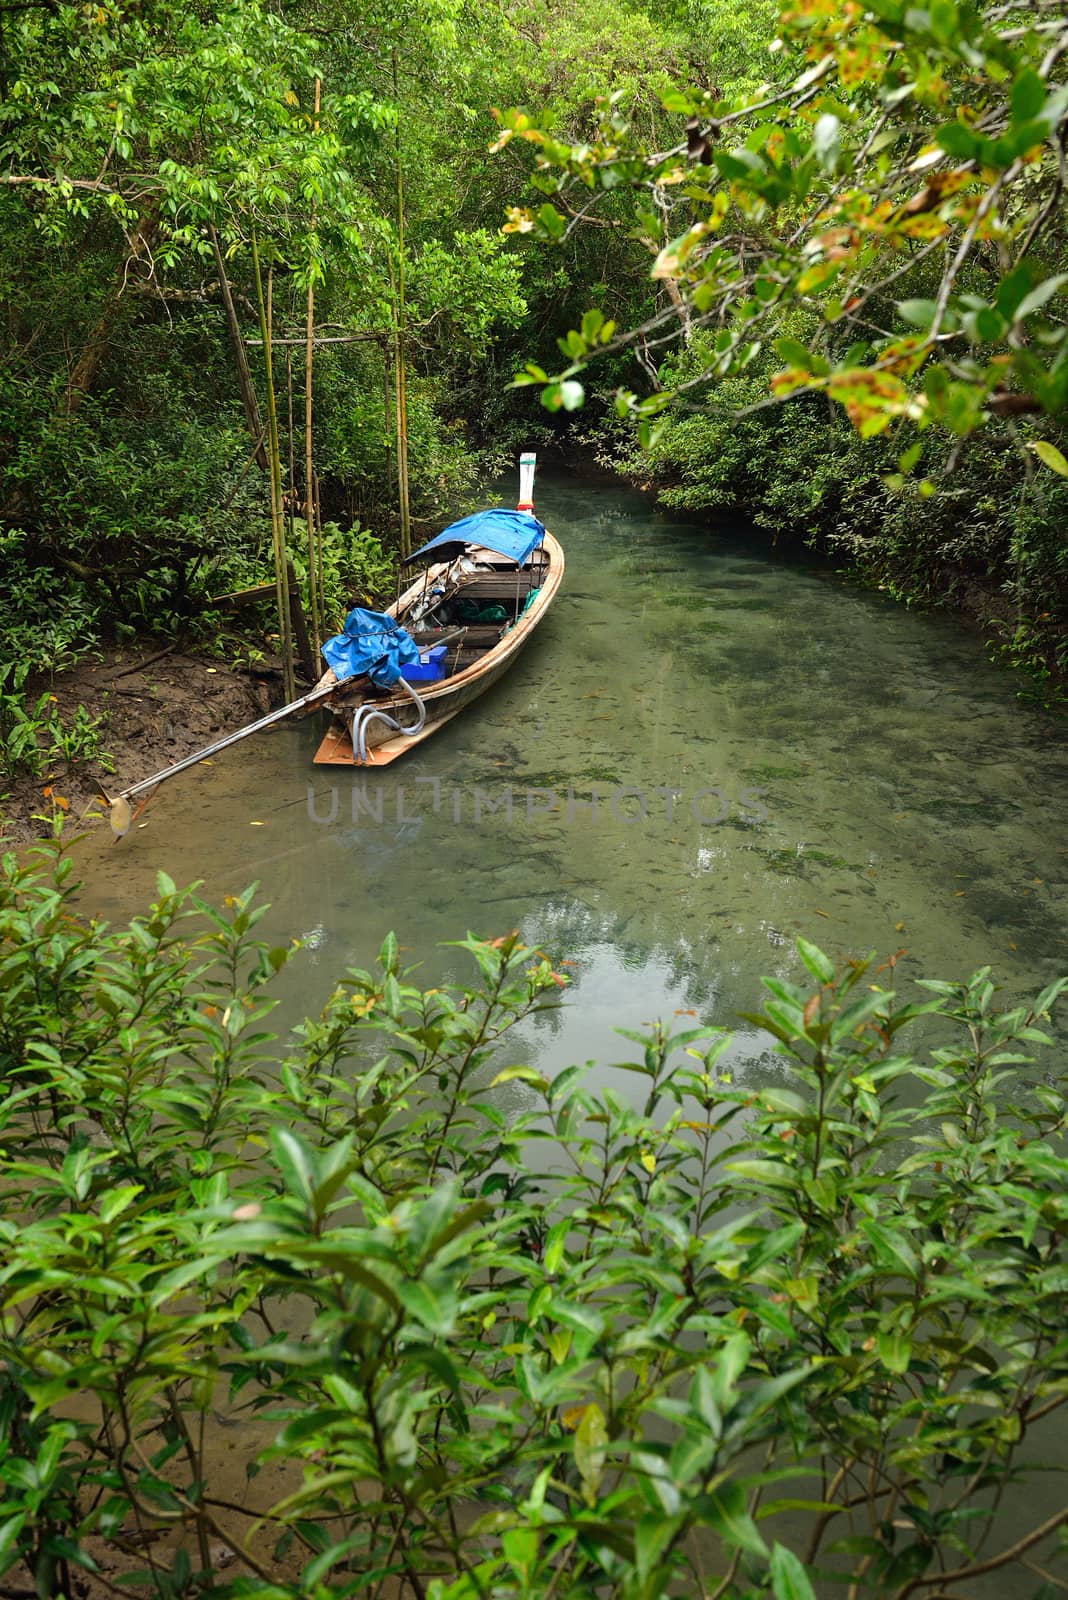 longtail boat in mangroves forest, Krabi, Thailand. by think4photop